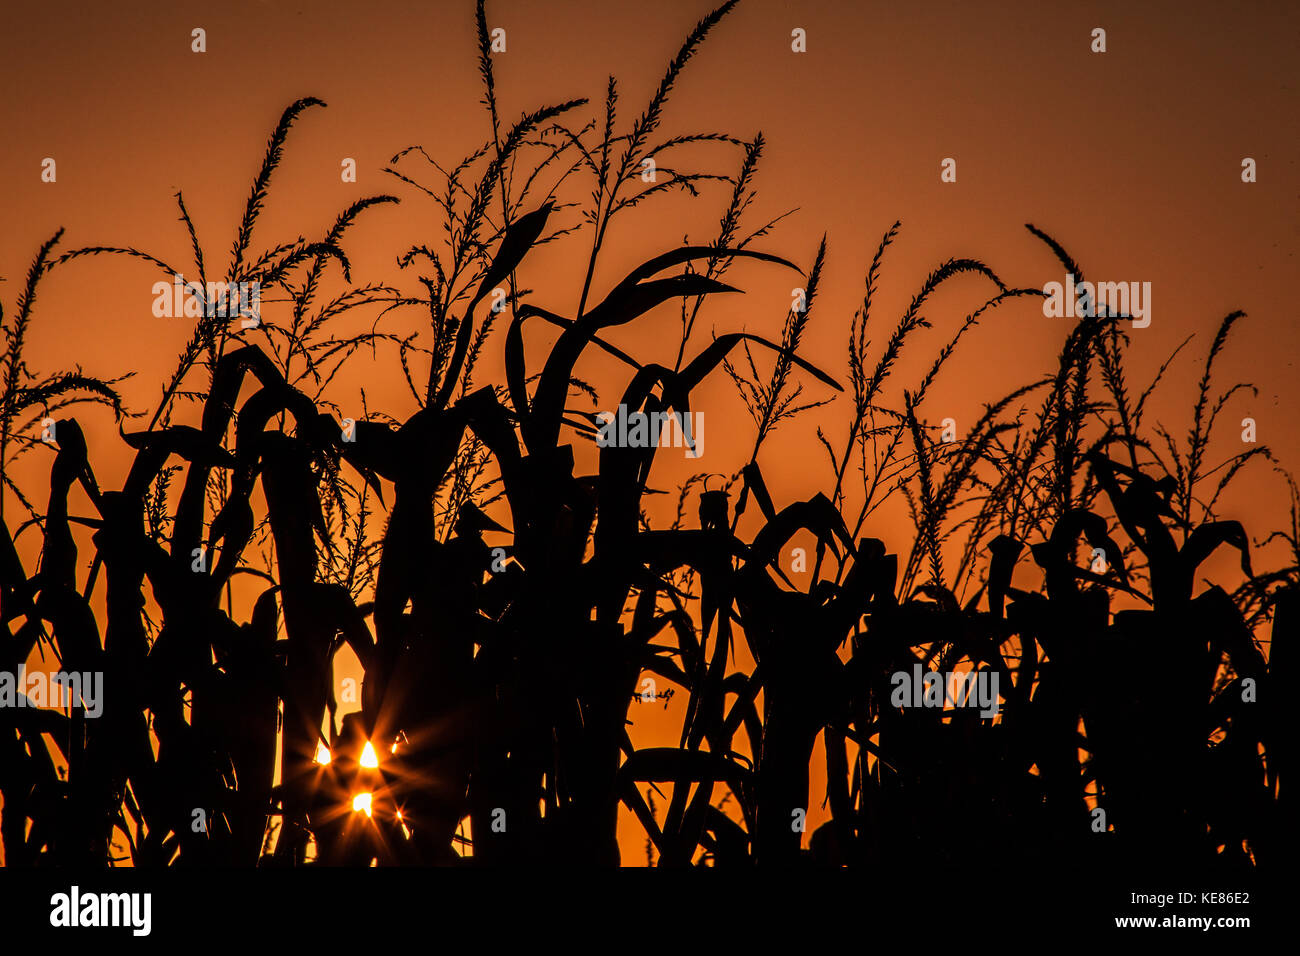 Black corn stalks and tassels in silhouette against a deep orange October sky with three starbursts from the setting sun peaking through the leaves. Stock Photo